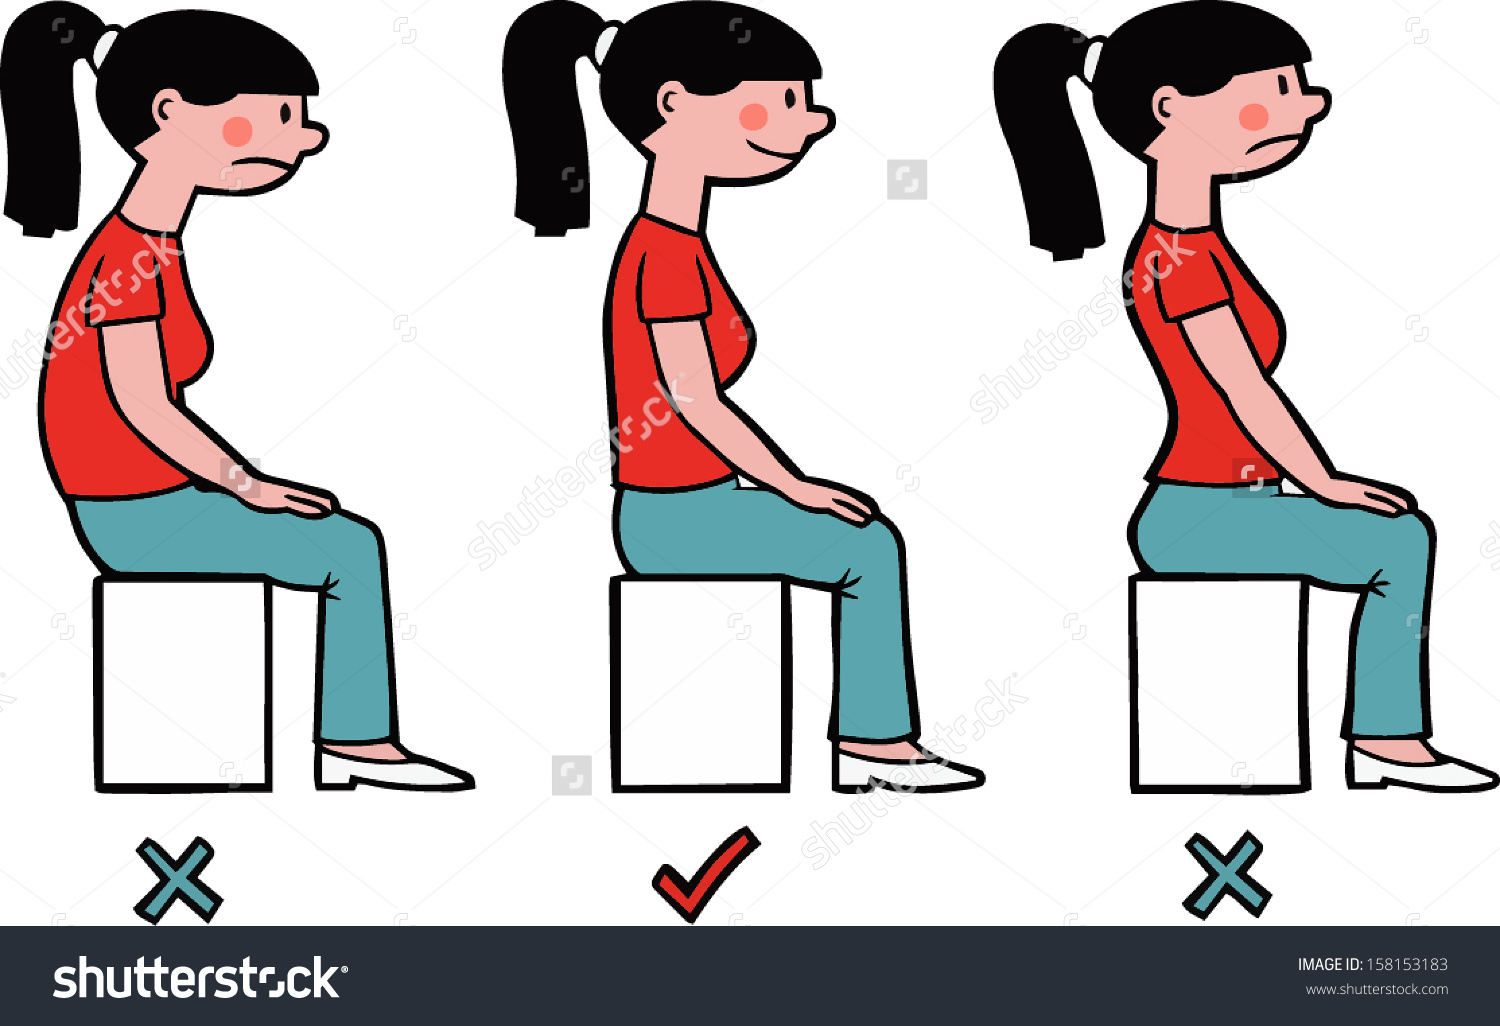 Student not sitting in chair correctly clipart.